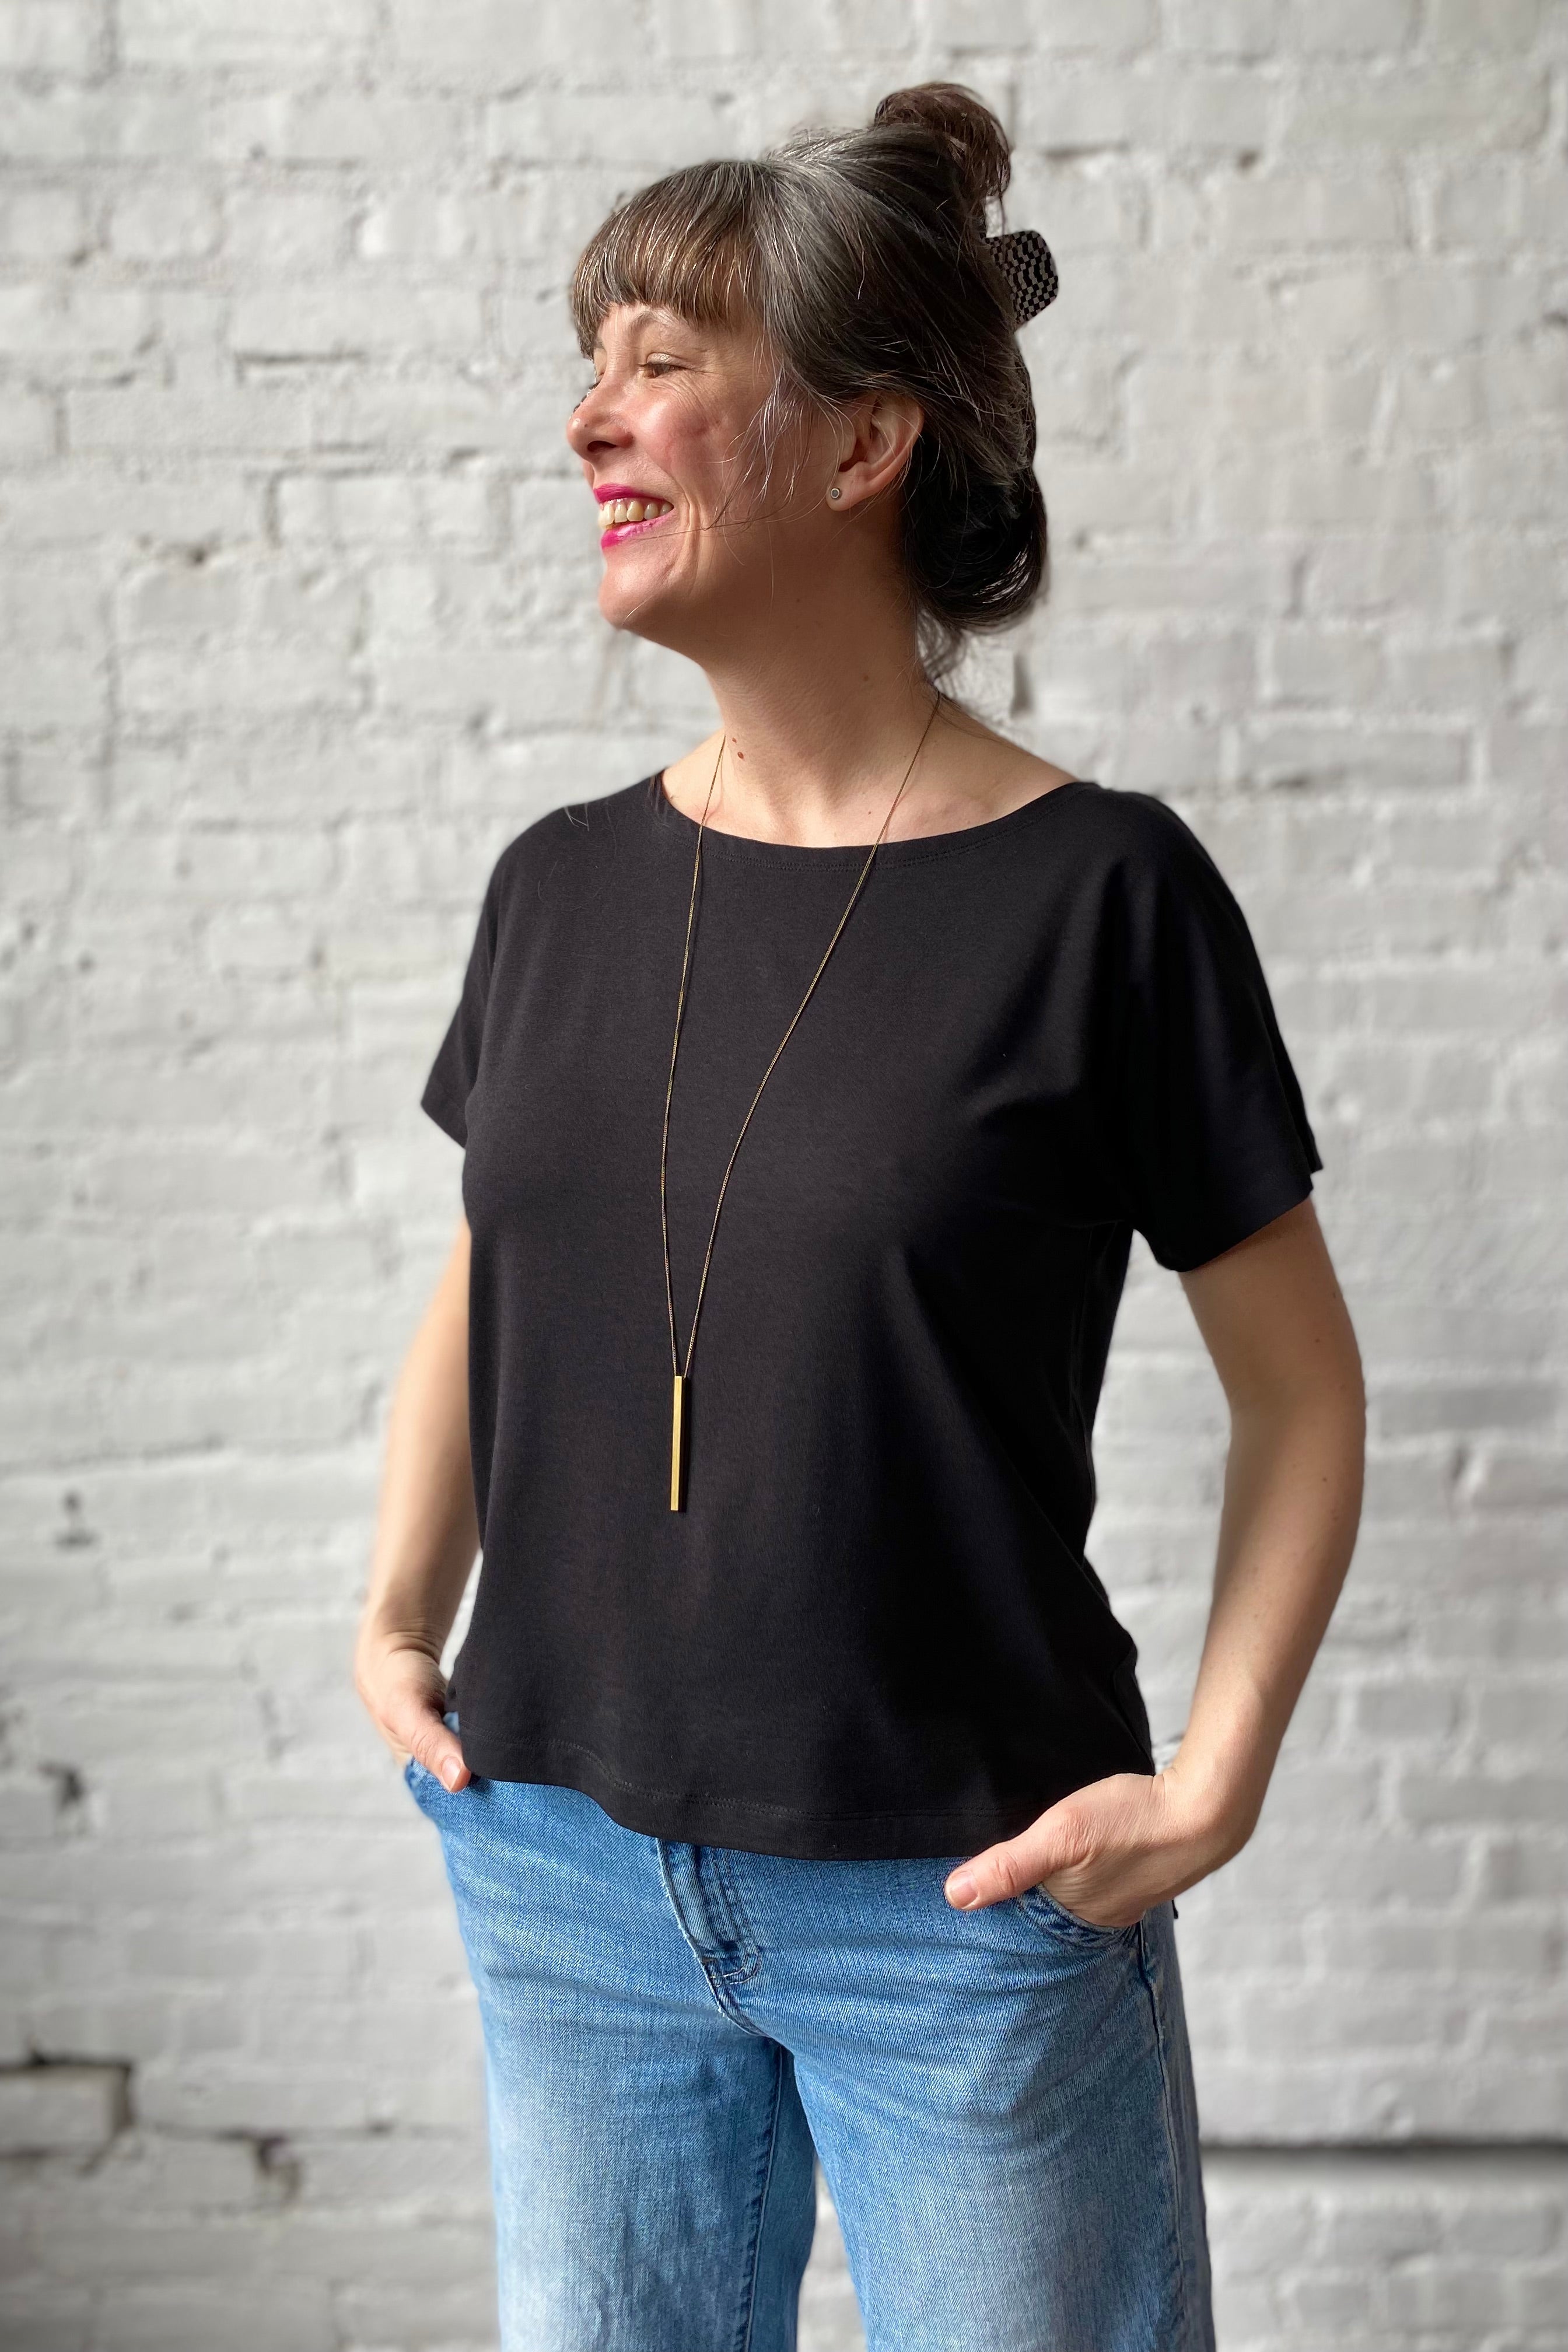 Woman wearing an unprinted black boatneck tee with gold necklace and blue jeans against a white brick wall background